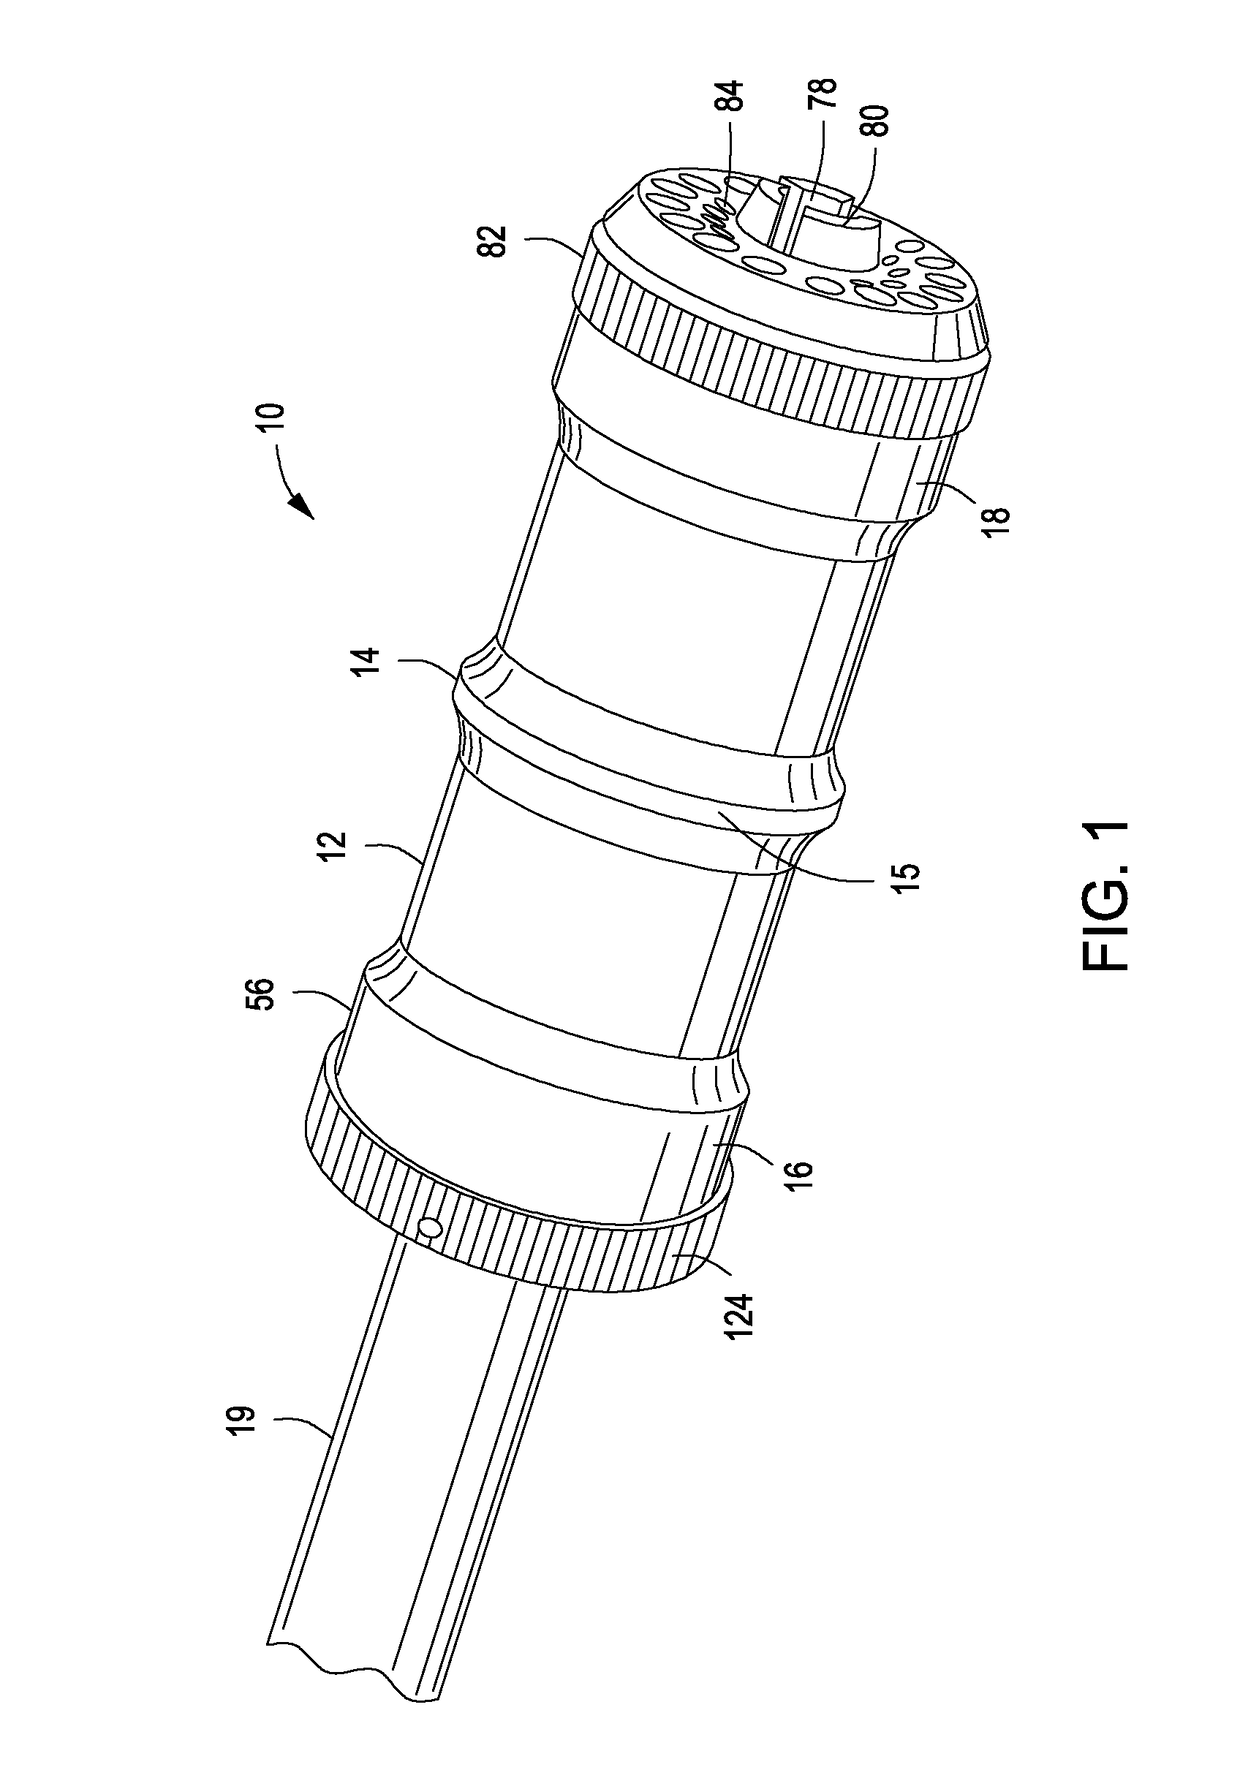 Firearm noise and flash suppressor having ratcheted collet locking mechanism